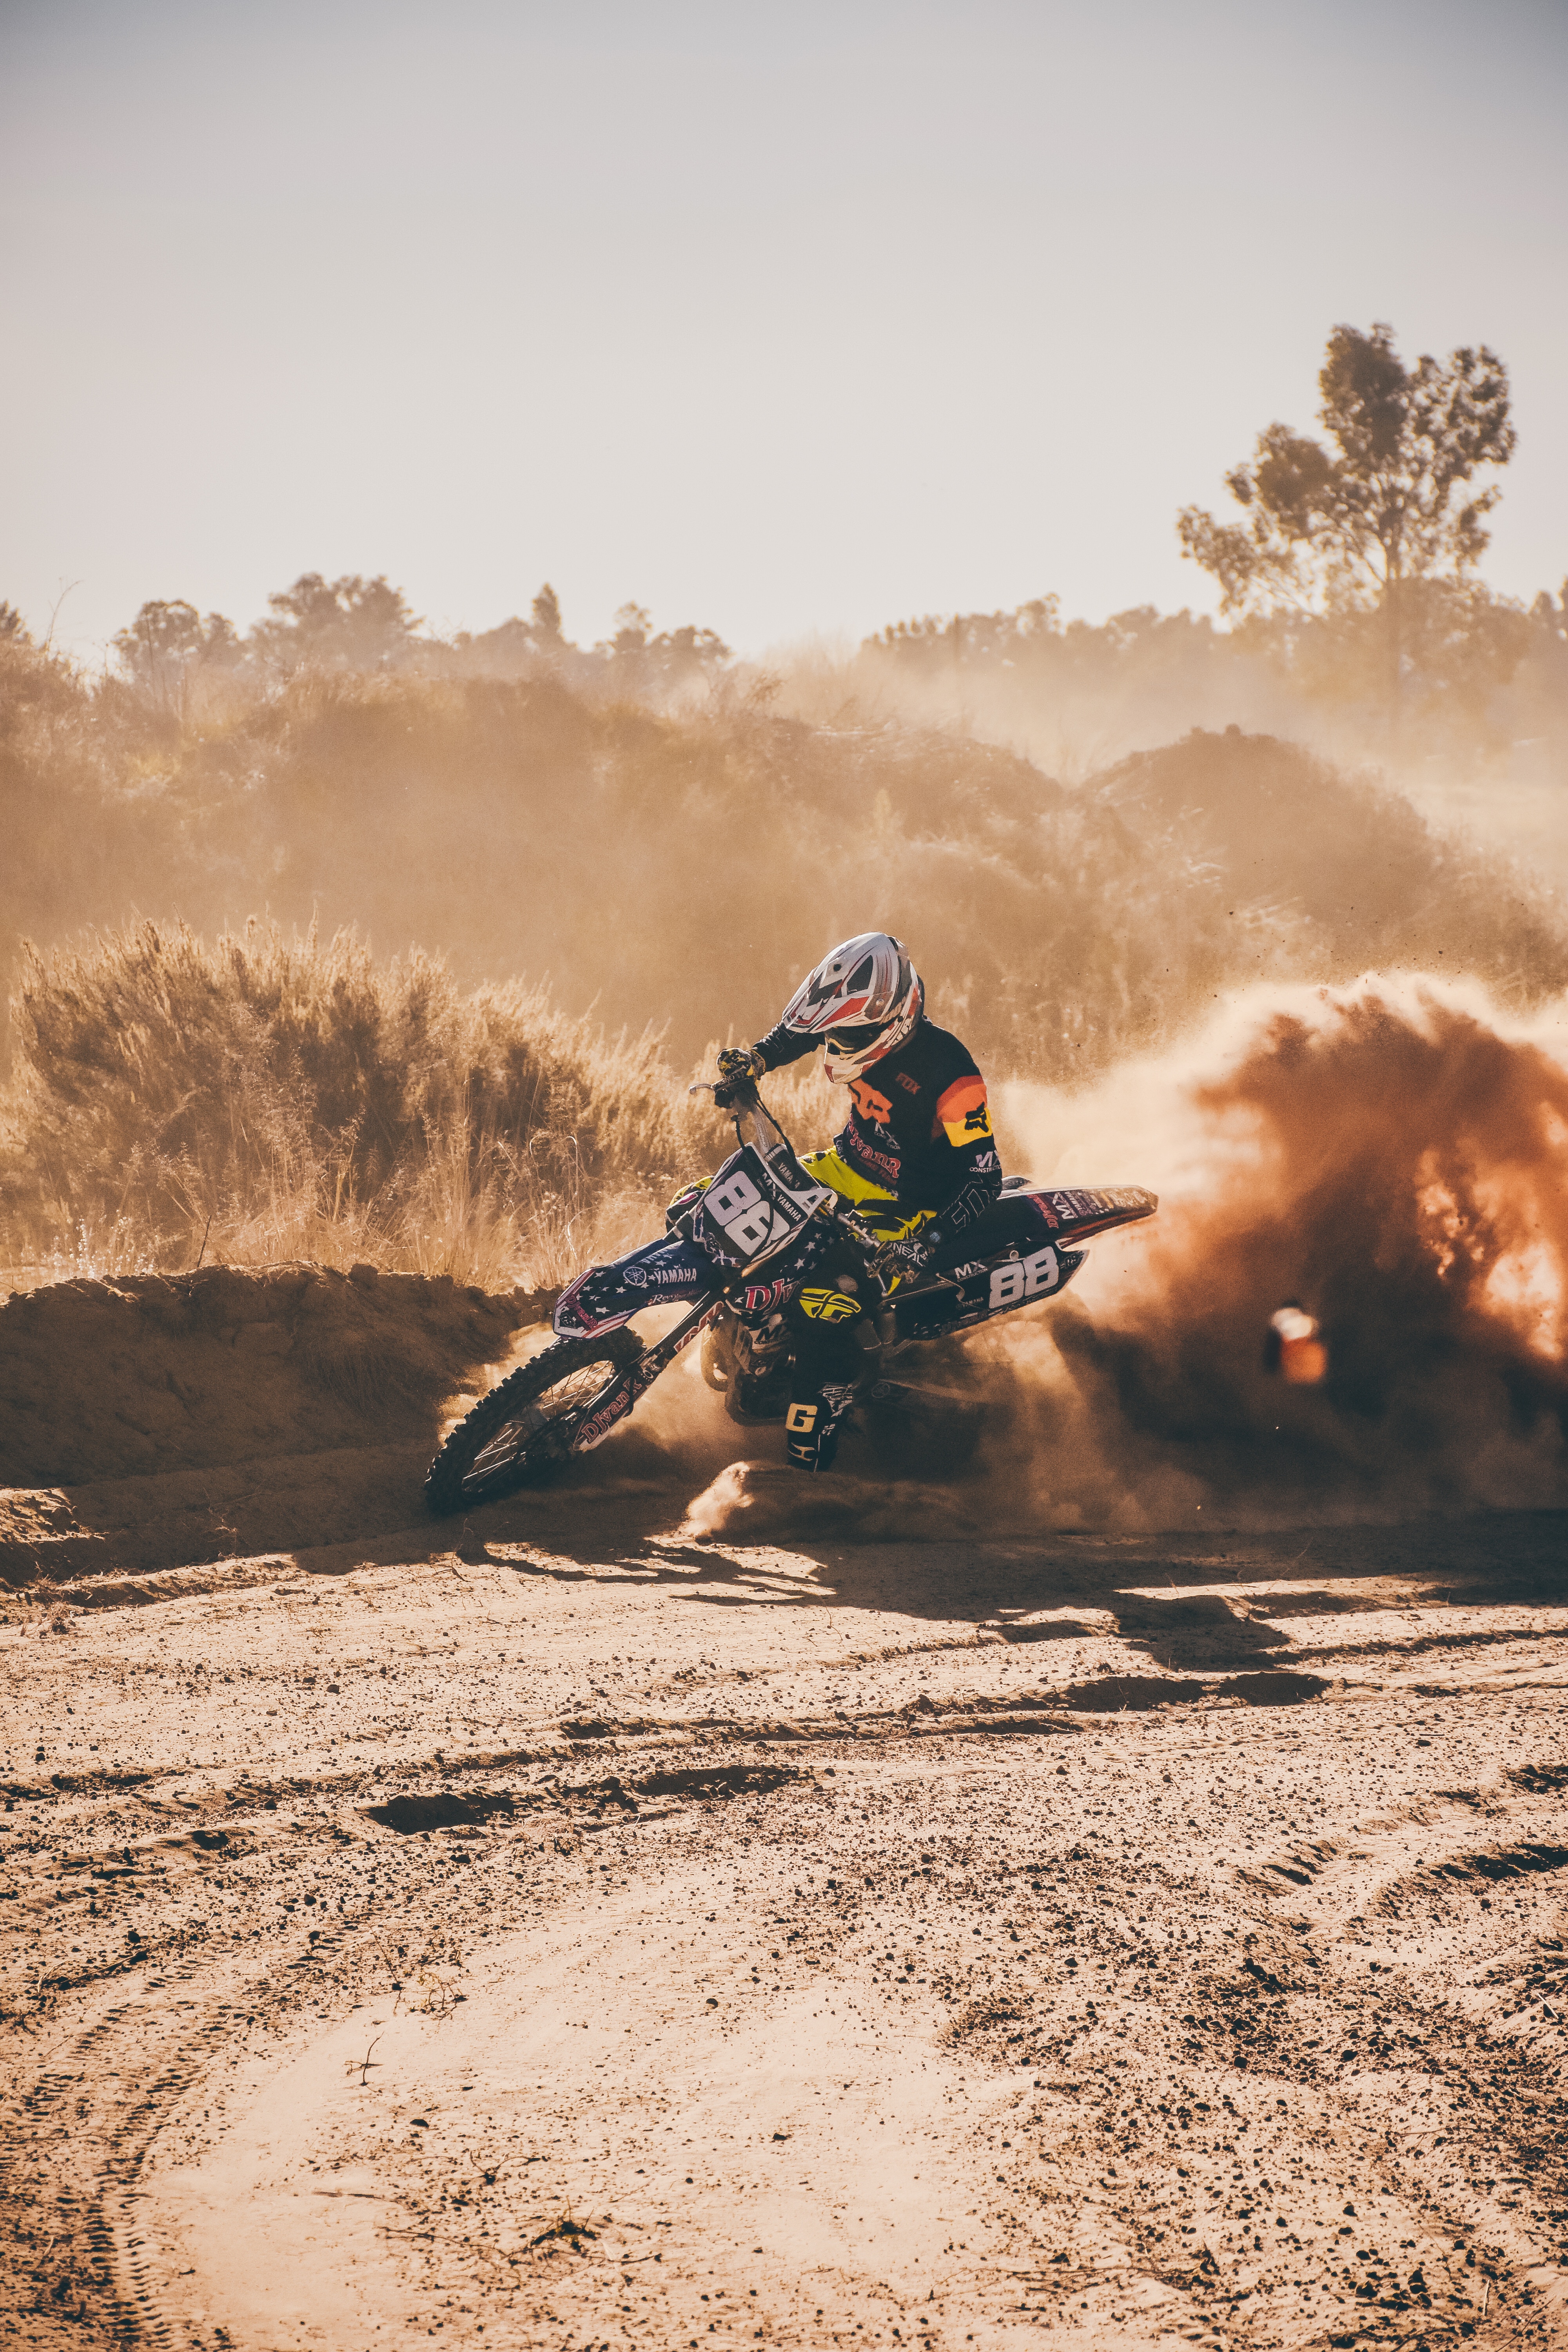 sports, off road, rally, races, motorcyclist, motorcycle, impassability, drift